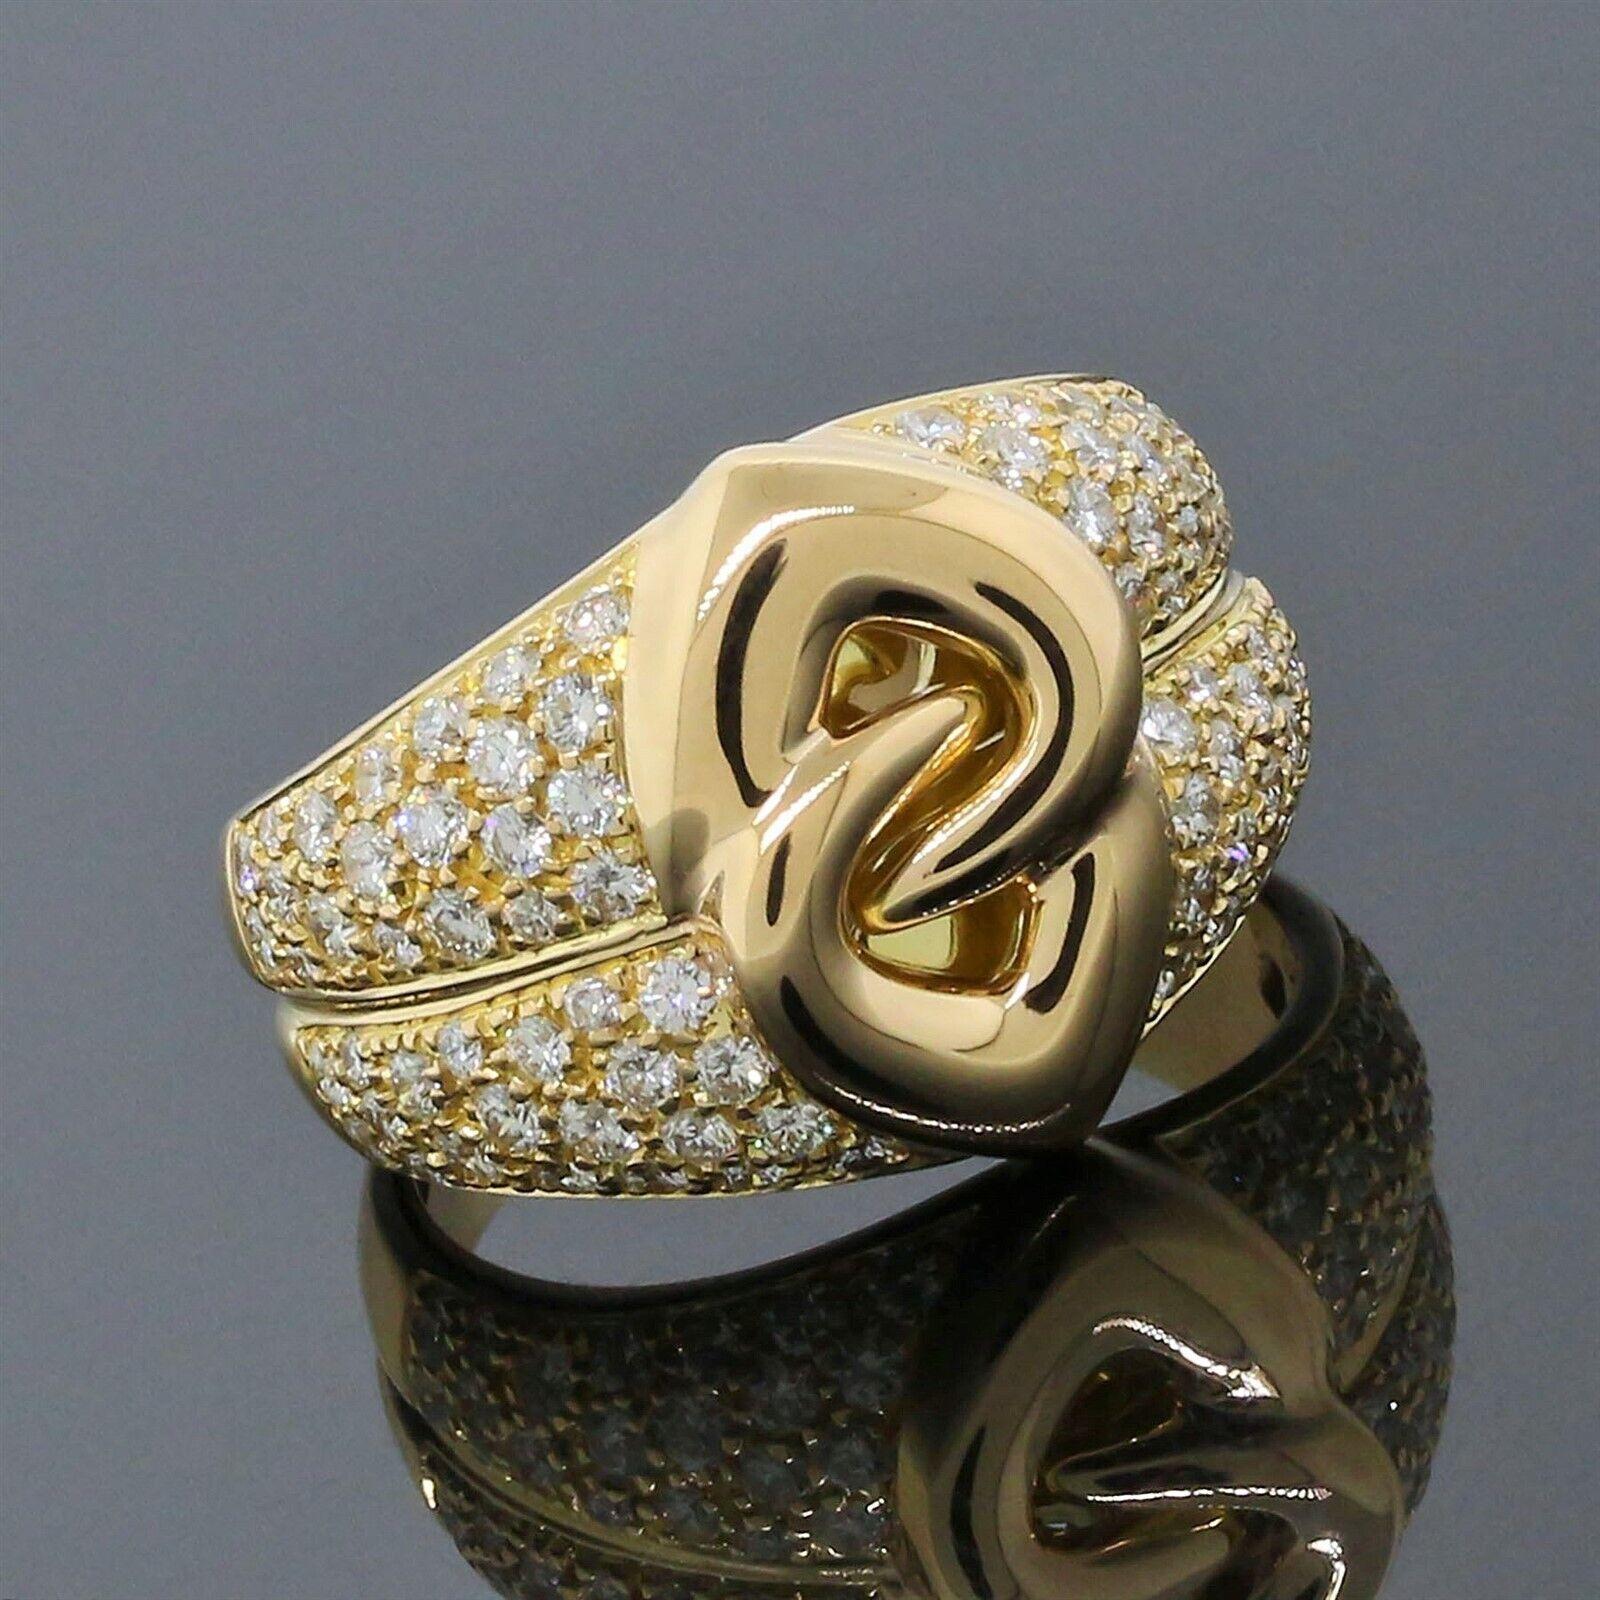 Bvlgari Italy 18k Yellow Gold & Diamond Interlocking Heart Ring w/Box

Here is your chance to purchase a beautiful and highly collectible designer ring.    

Authentic Bvlgari 18K Yellow Gold Double Heart Ring Size 8 1/2

Item Details:
The Ring